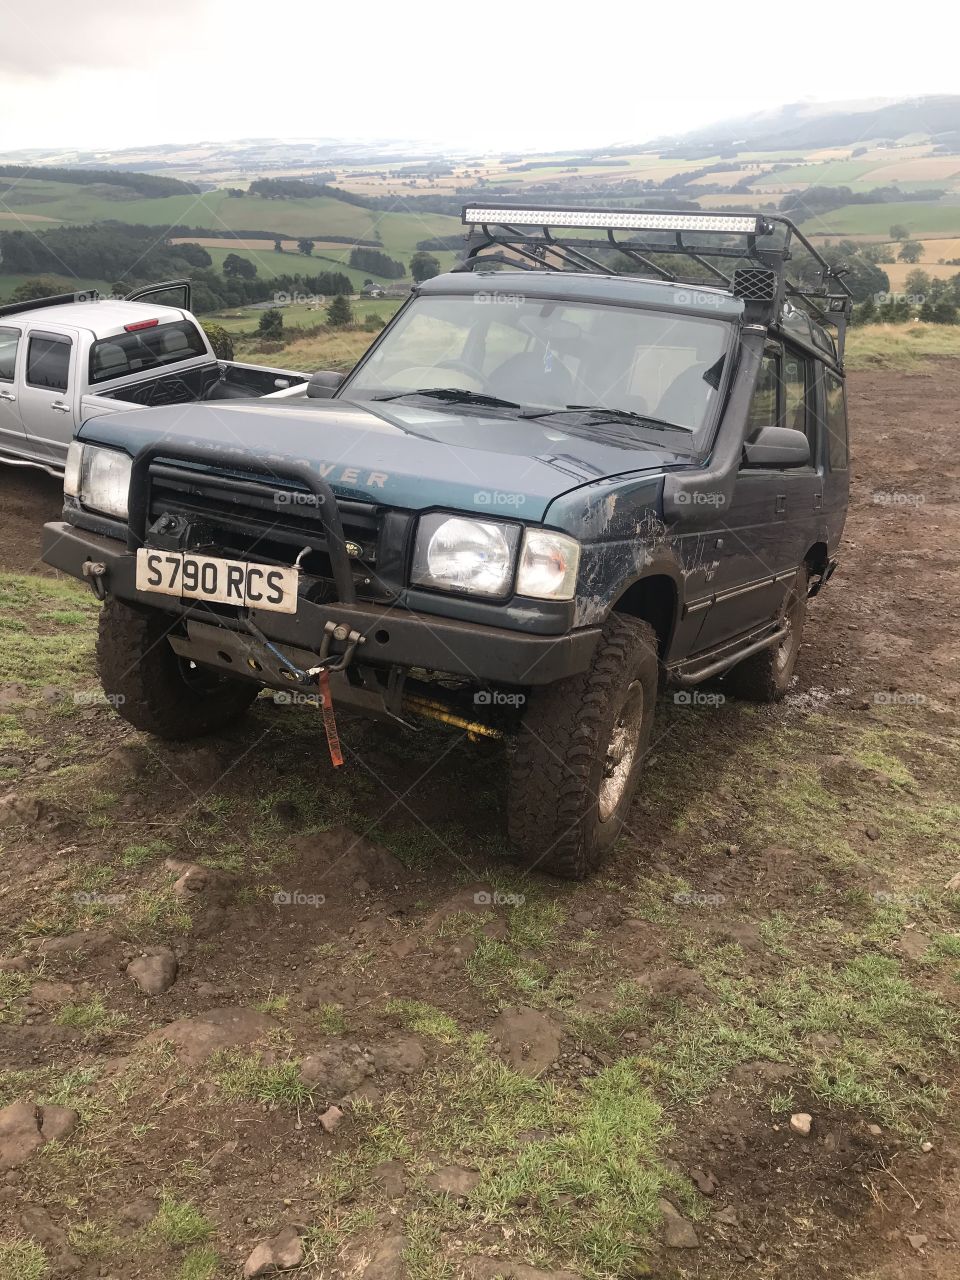 My old beaten Landrover discovery 50th anniversary edition on top of Glentarkie hill 